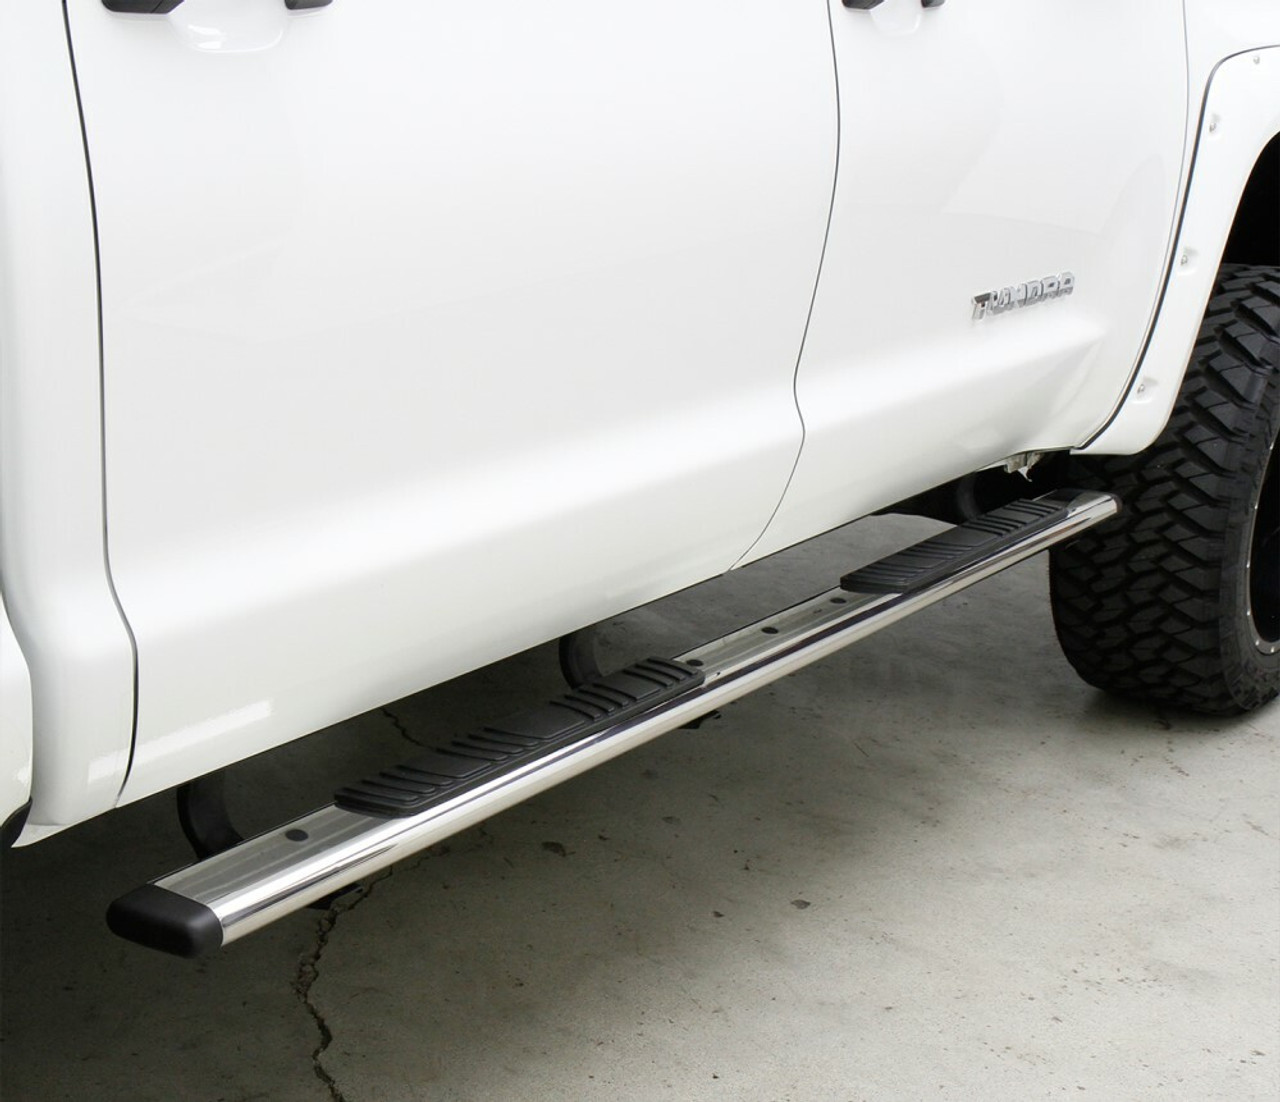 Go Rhino 685404387PS Chevrolet, Silverado 2500HD, 3500HD, 2015 - 2019, 5 inch OE Xtreme Low Profile - Complete Kit: Stainless steel, Polished, 650087PS side bars + 6840435 OE Xtreme Brackets. 5 inch wide x 87 inch long side bars, Diesel only